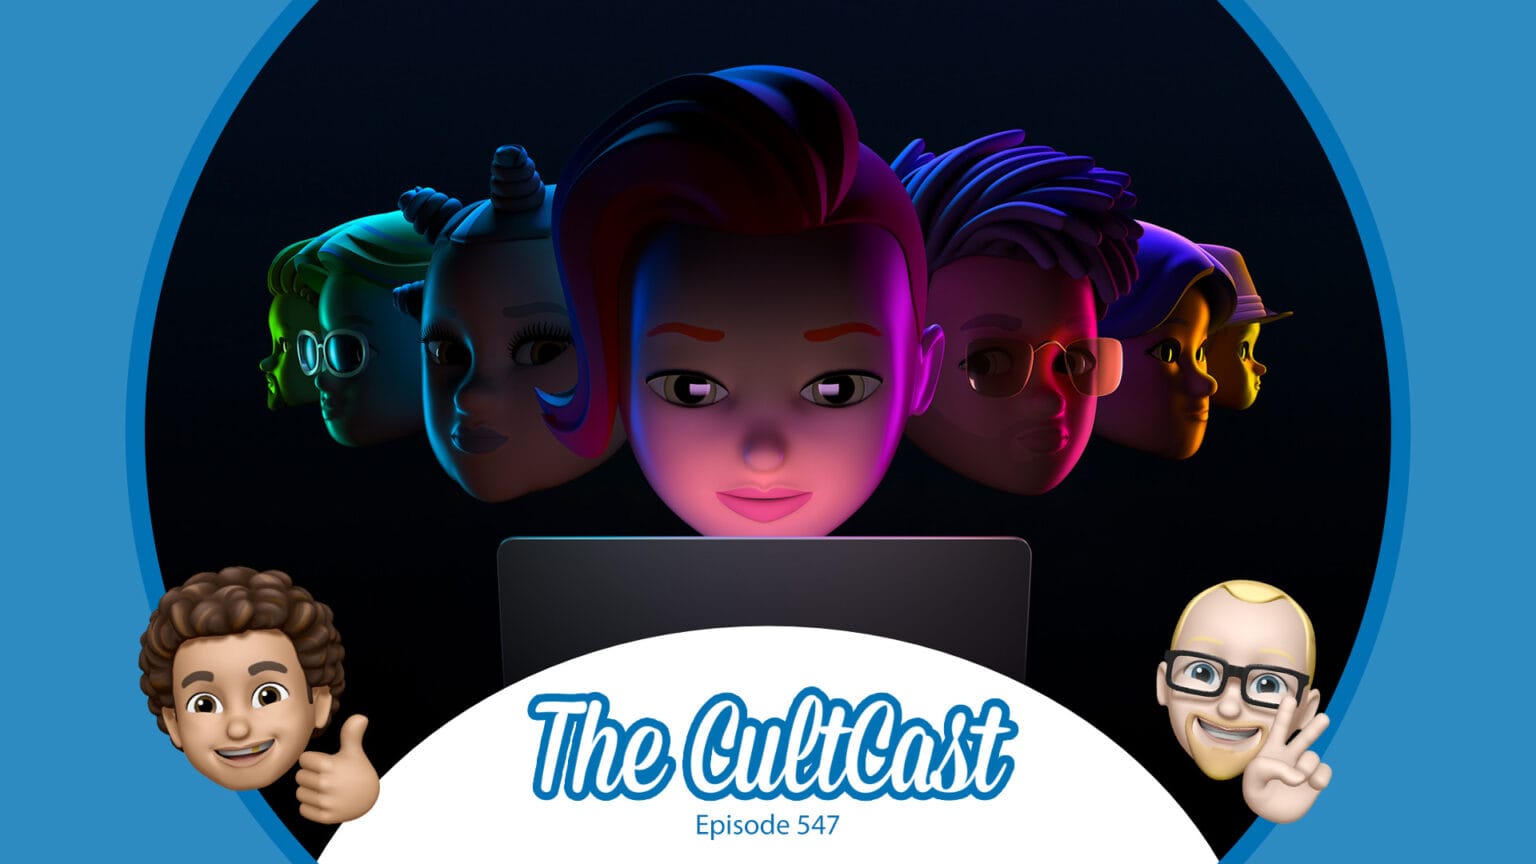 The CultCast 547: It's time to discuss our last-minute WWDC22 predictions, hopes and fears.